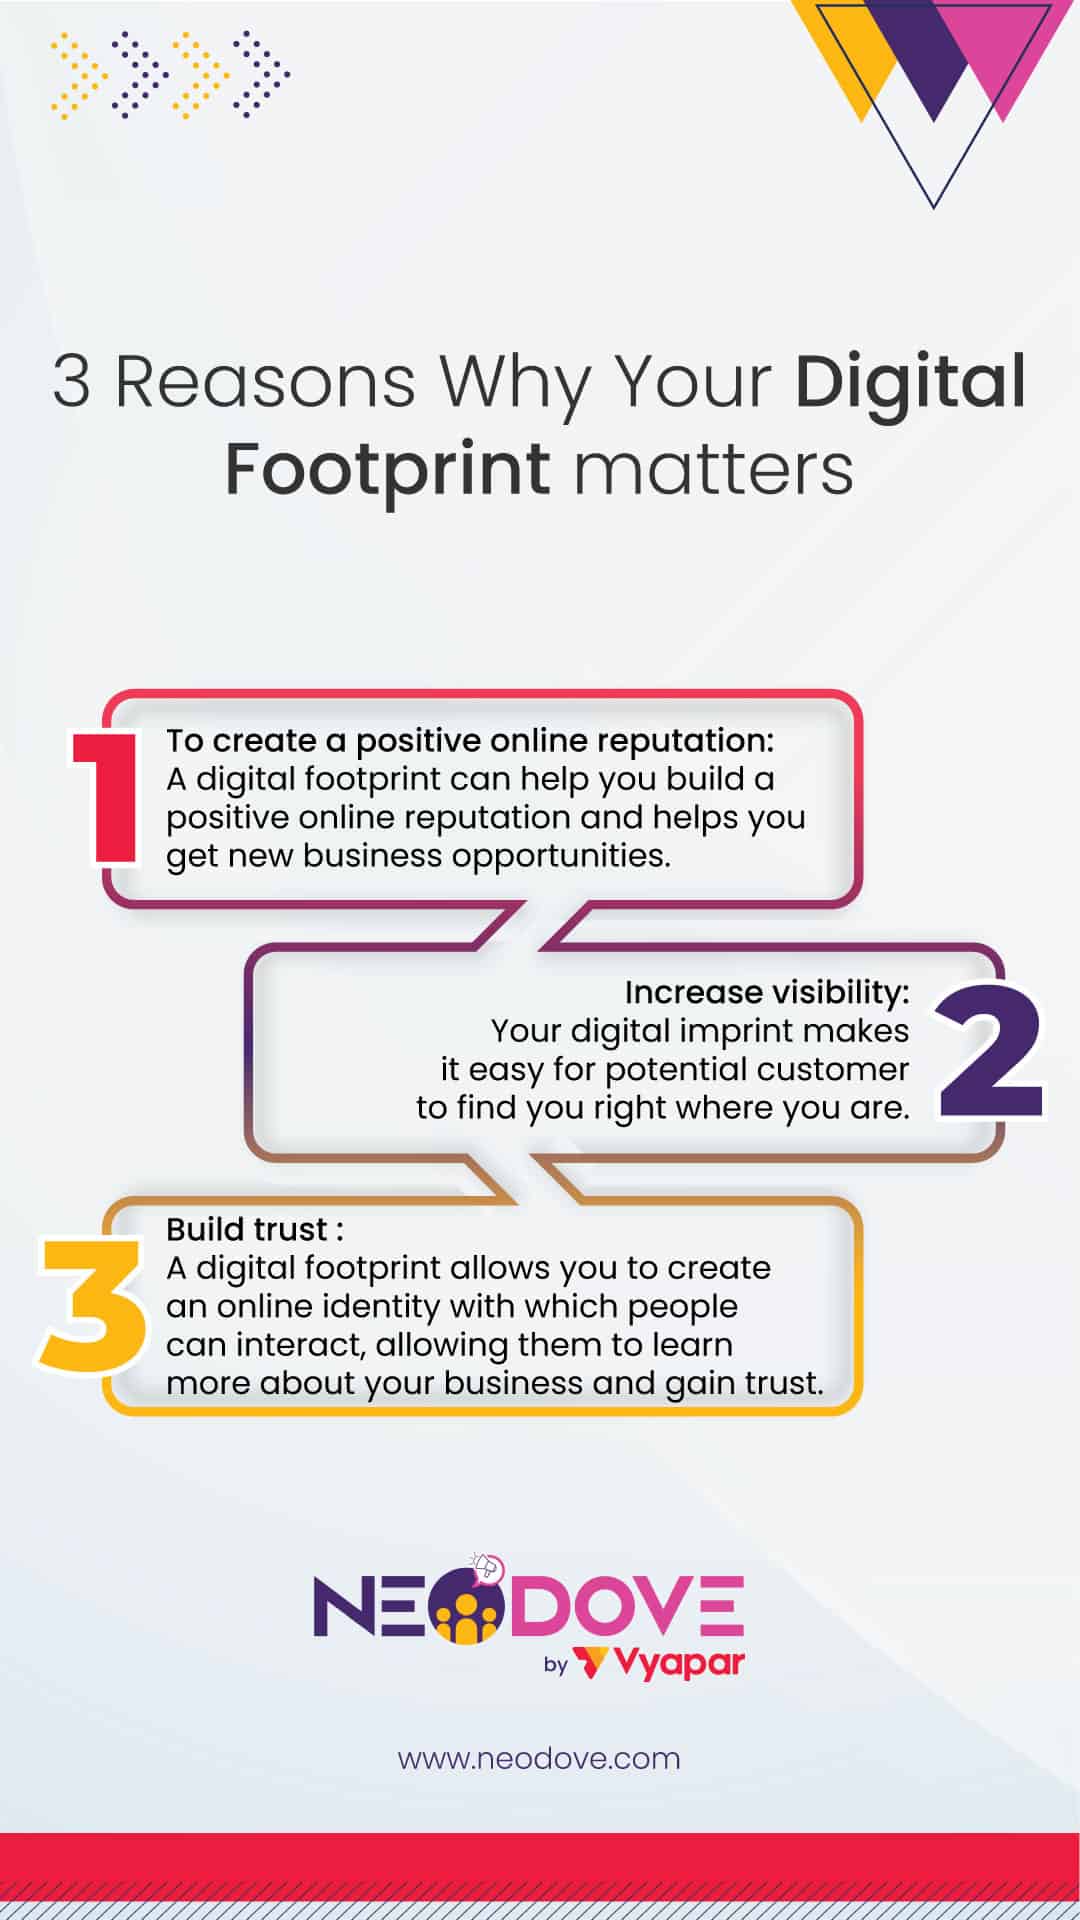 Why your digital footprint matters - NeoDove